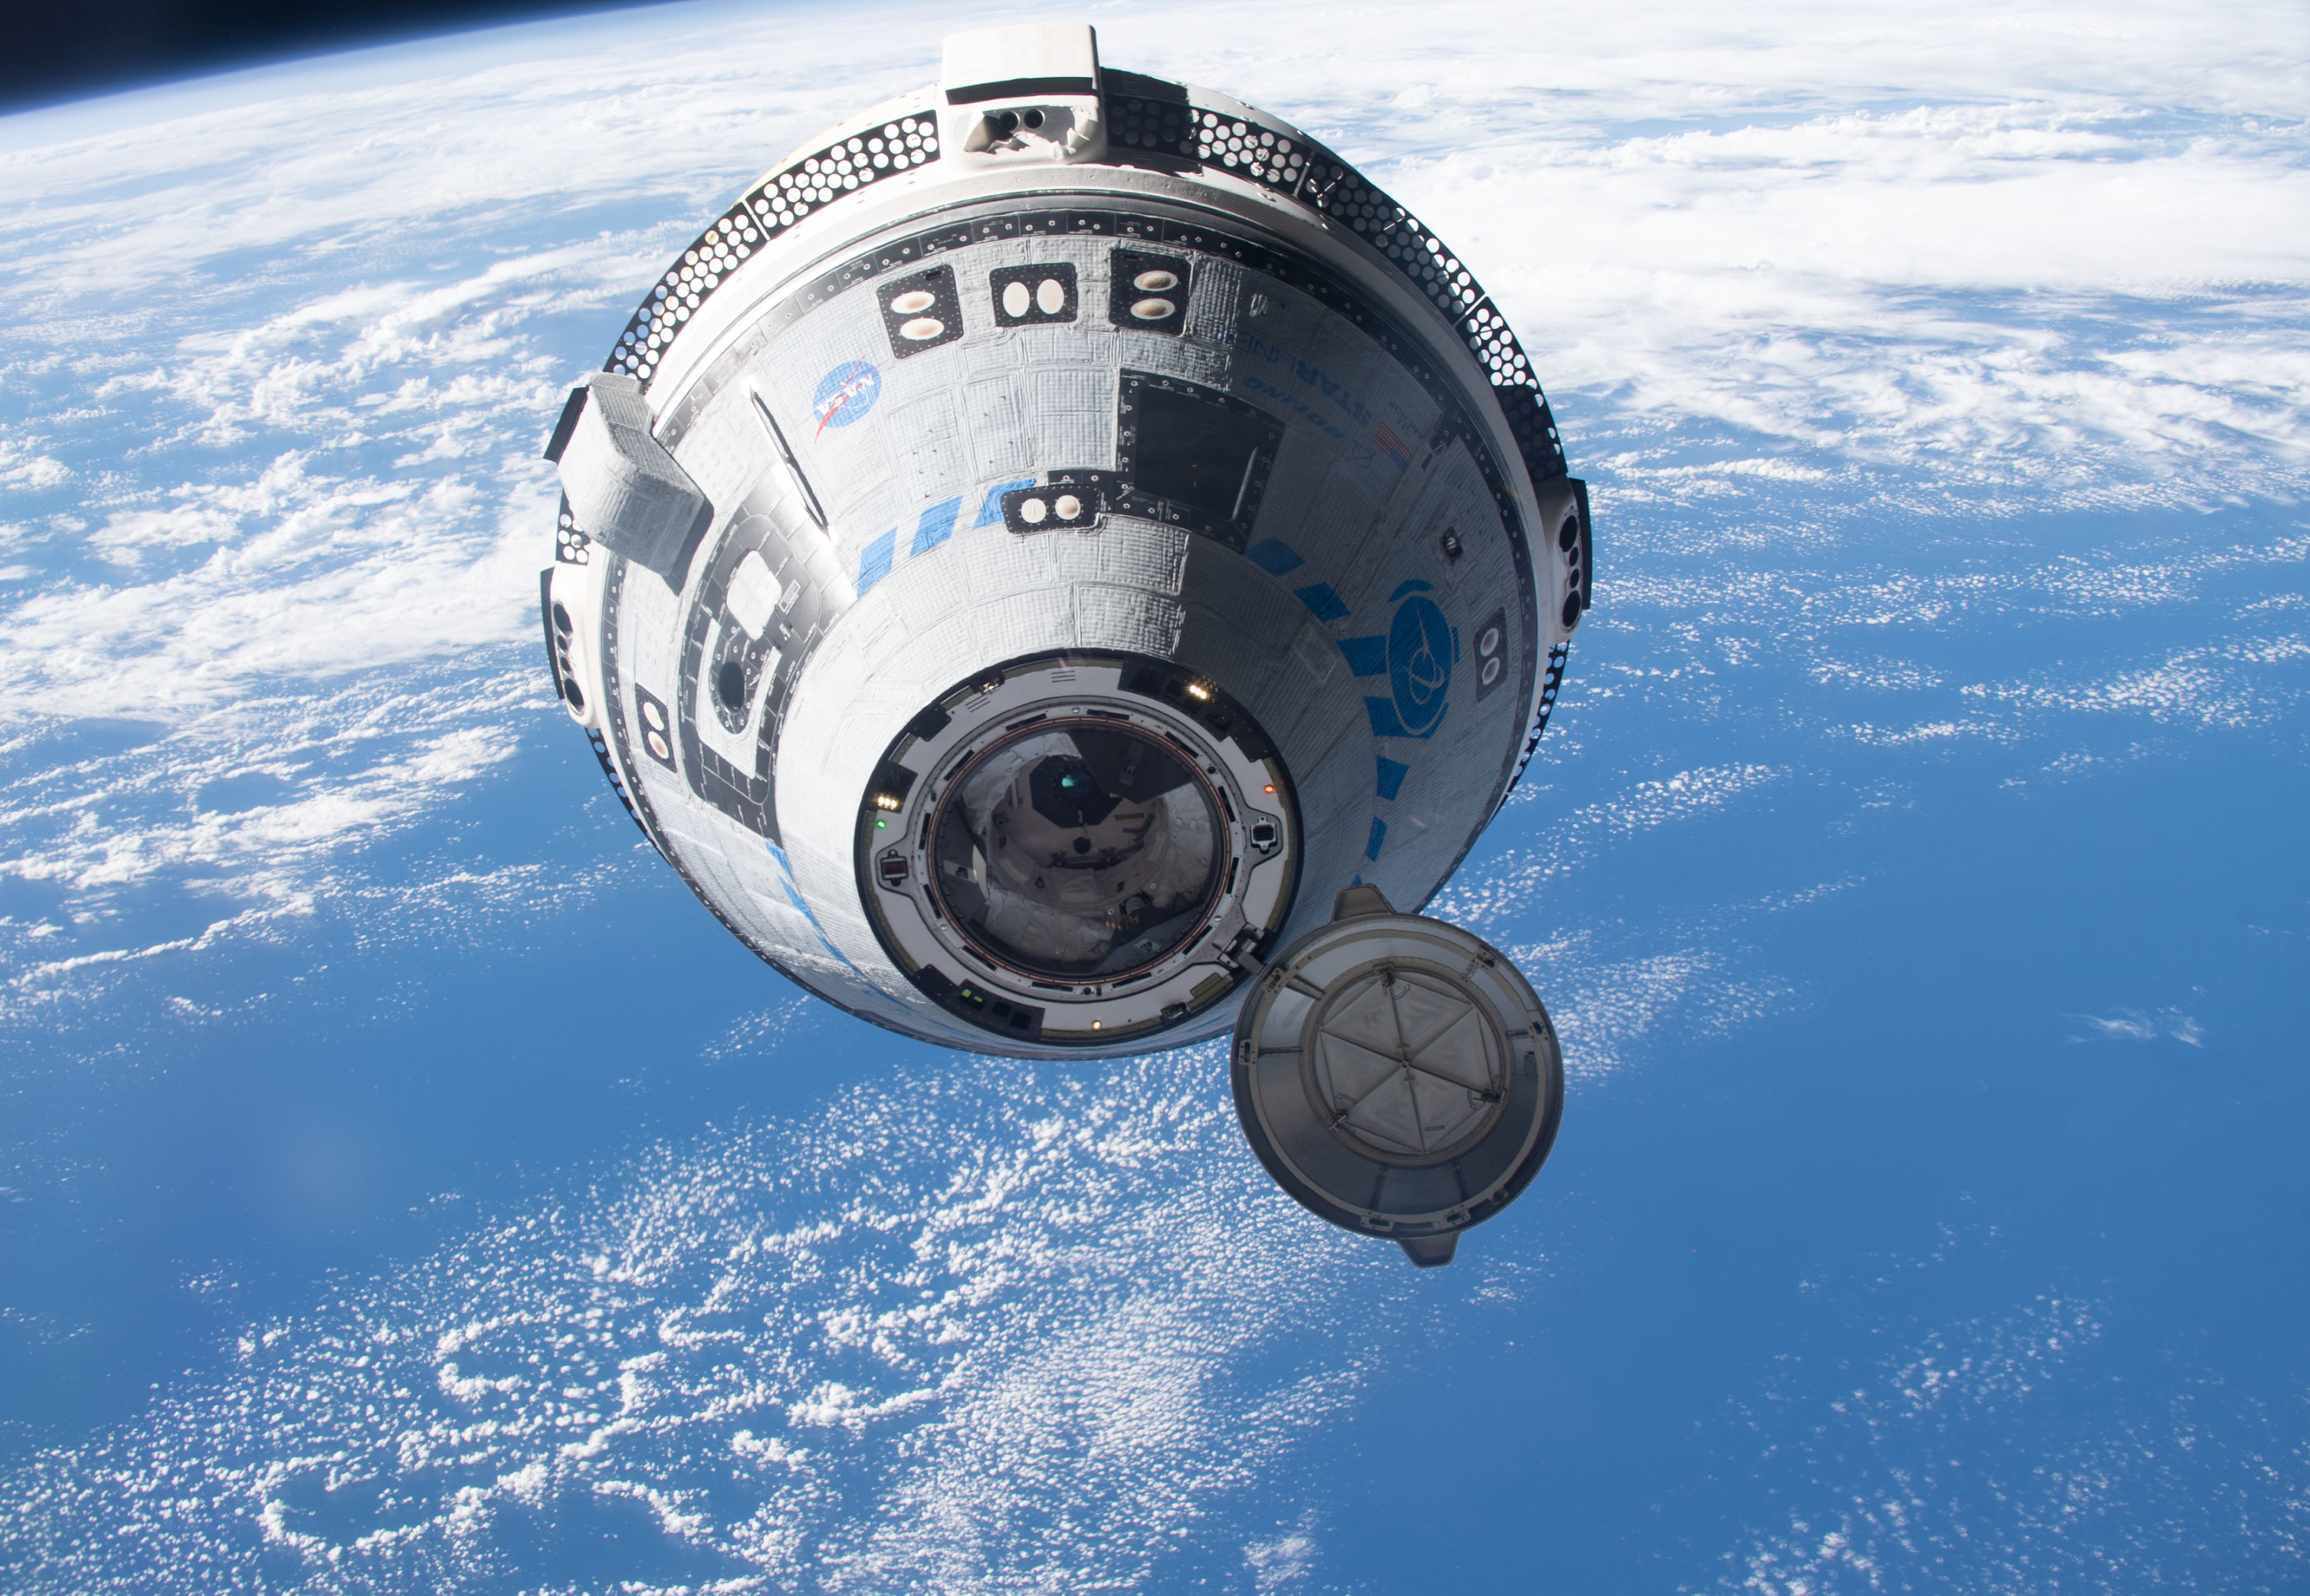 Boeing Starliner Astronauts Facing Indefinite Stay in Space